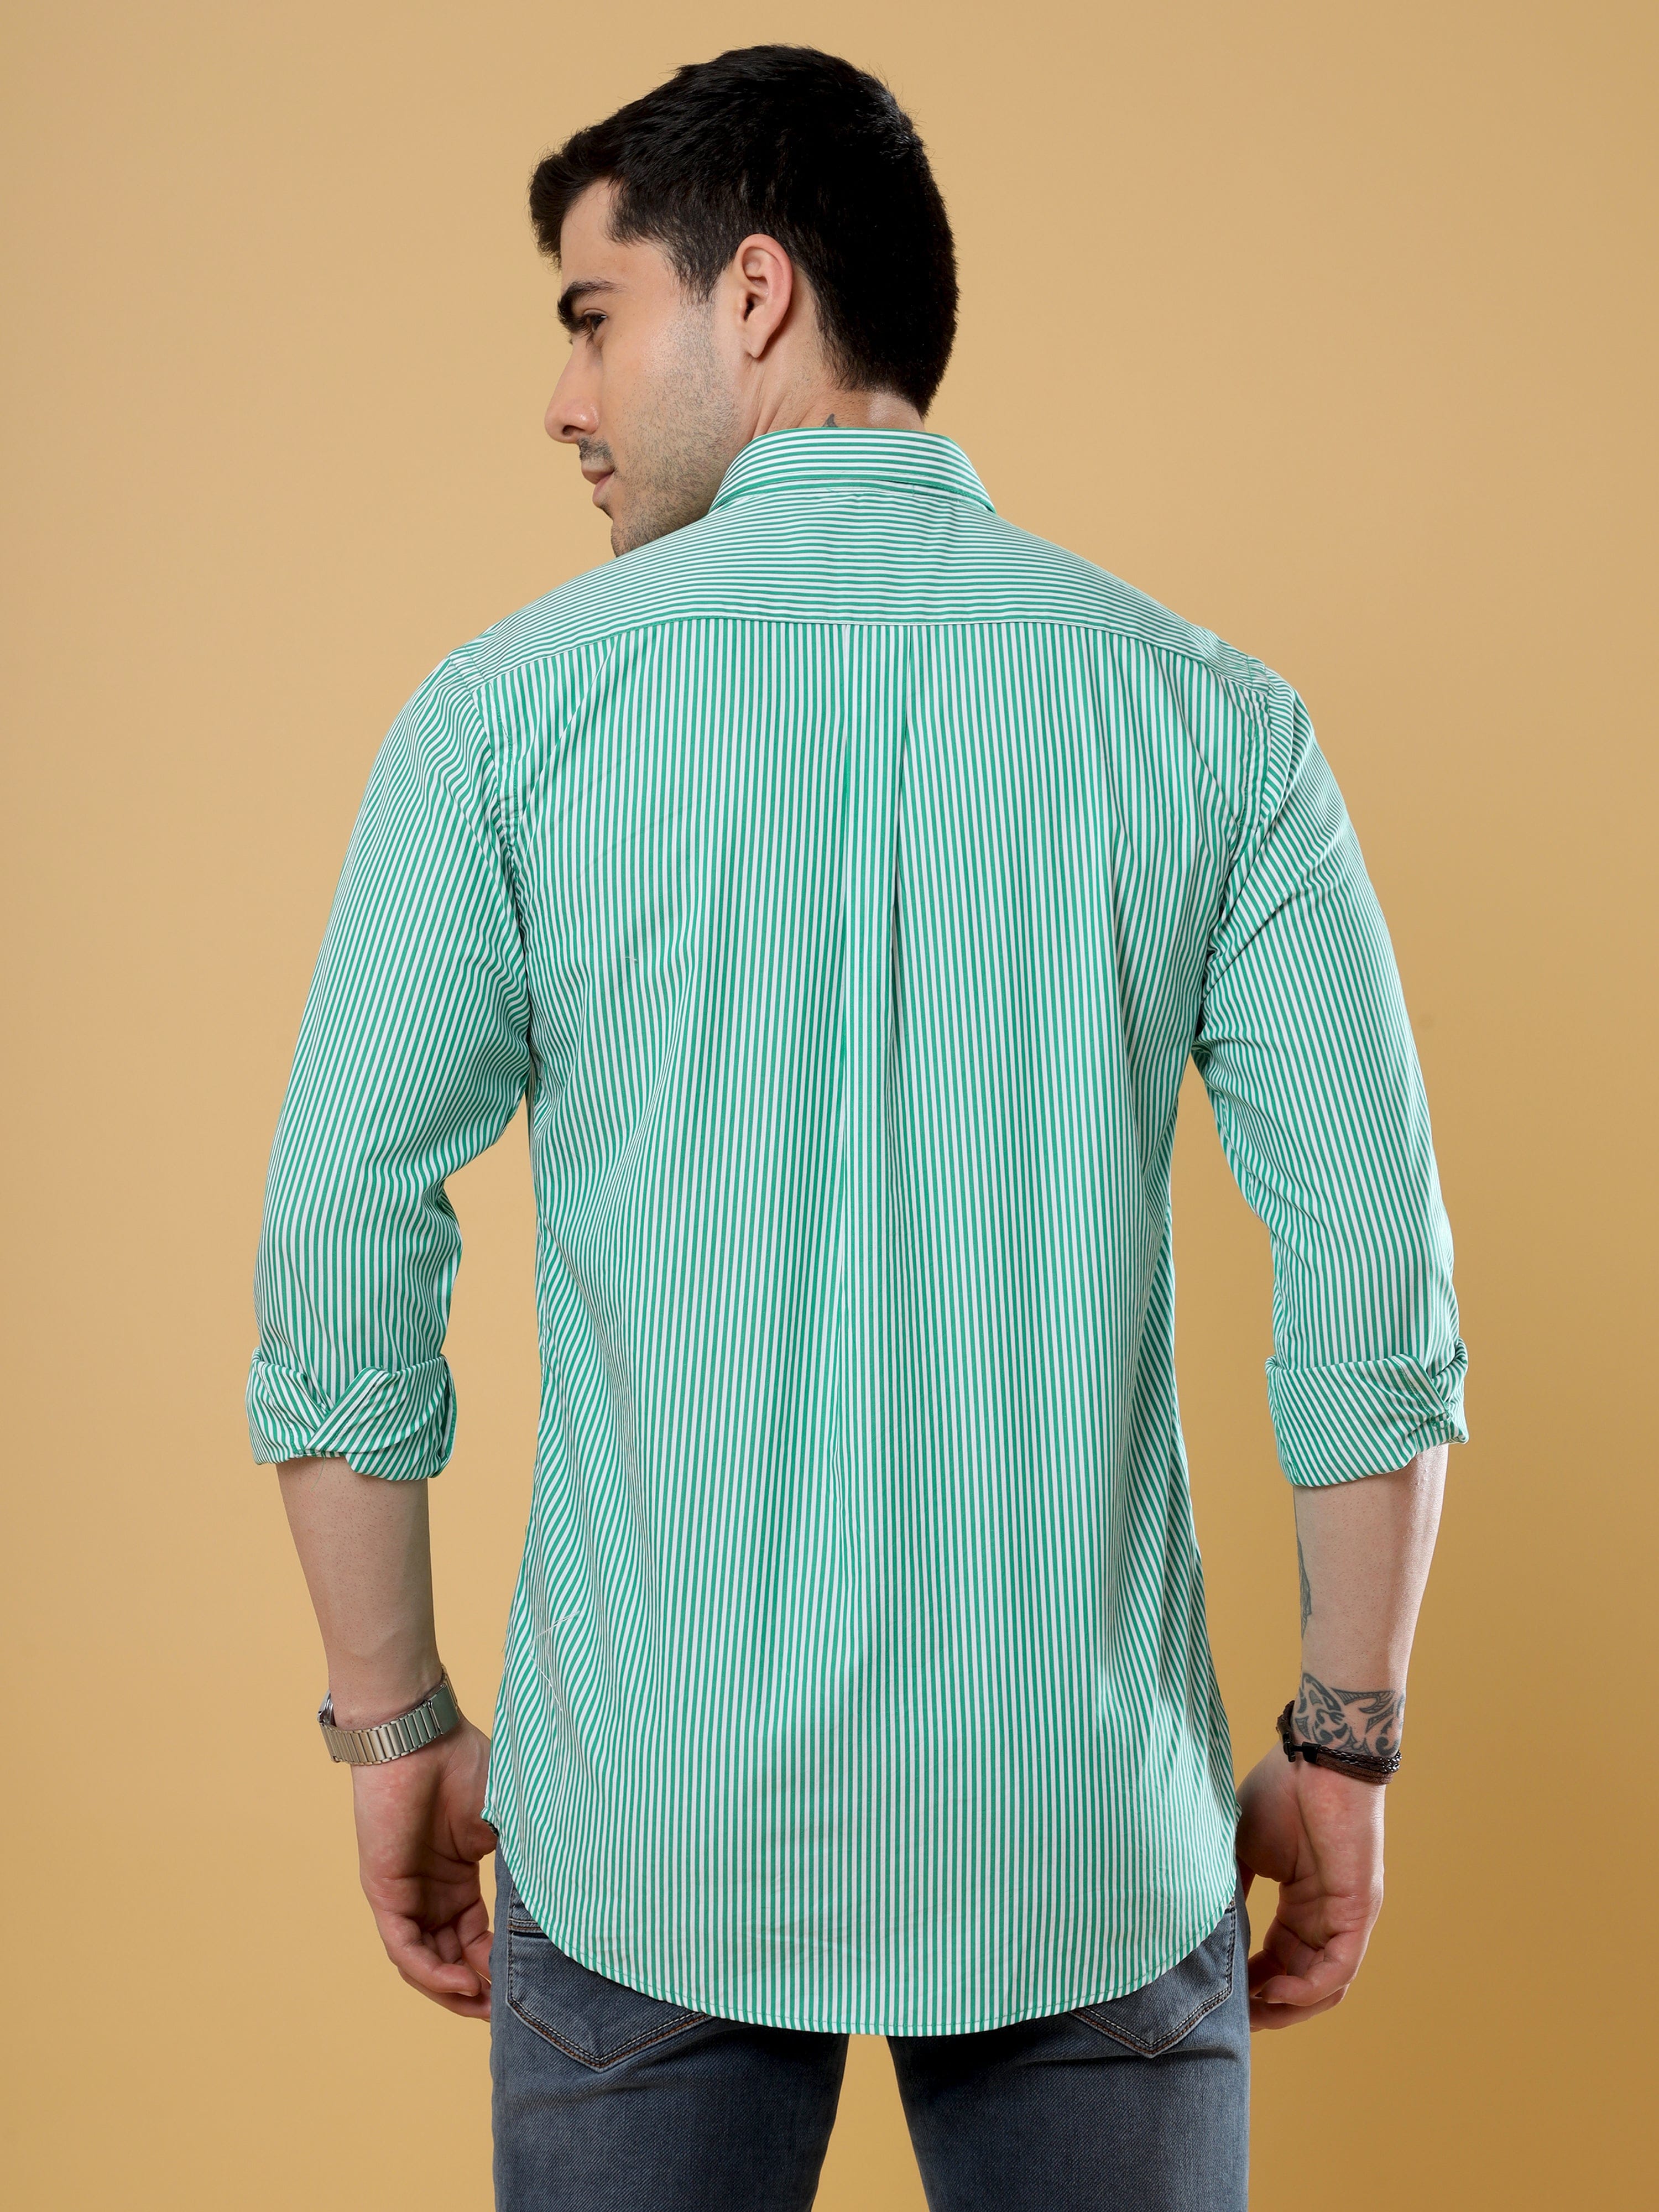 Buy Trendy White And Green Striped Shirt Full Sleeve OnlineRs. 699.00